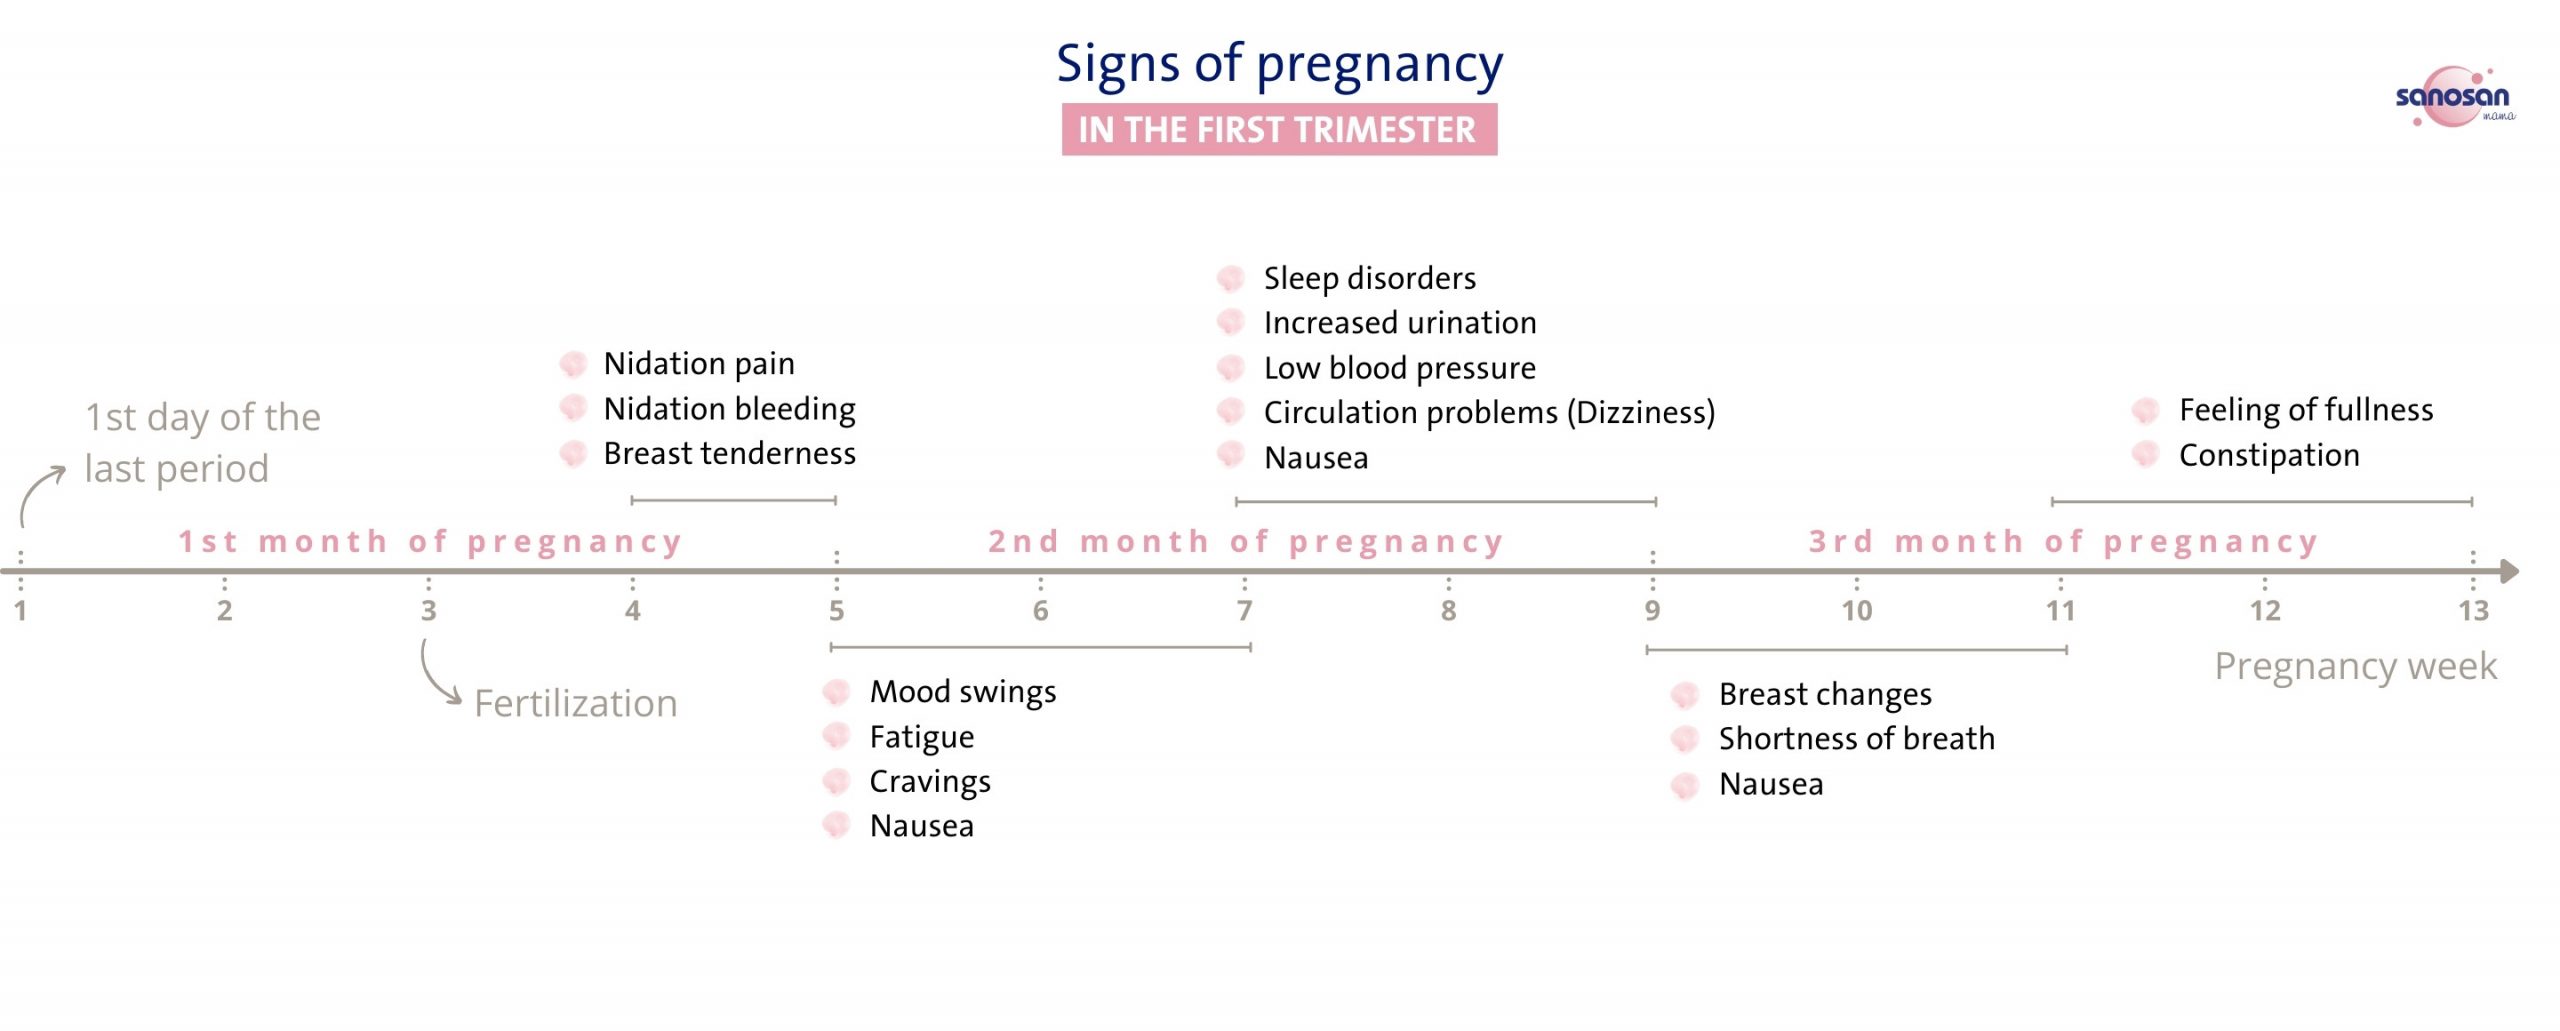 signs-of-pregnancy-in-the-first-trimester-infographic